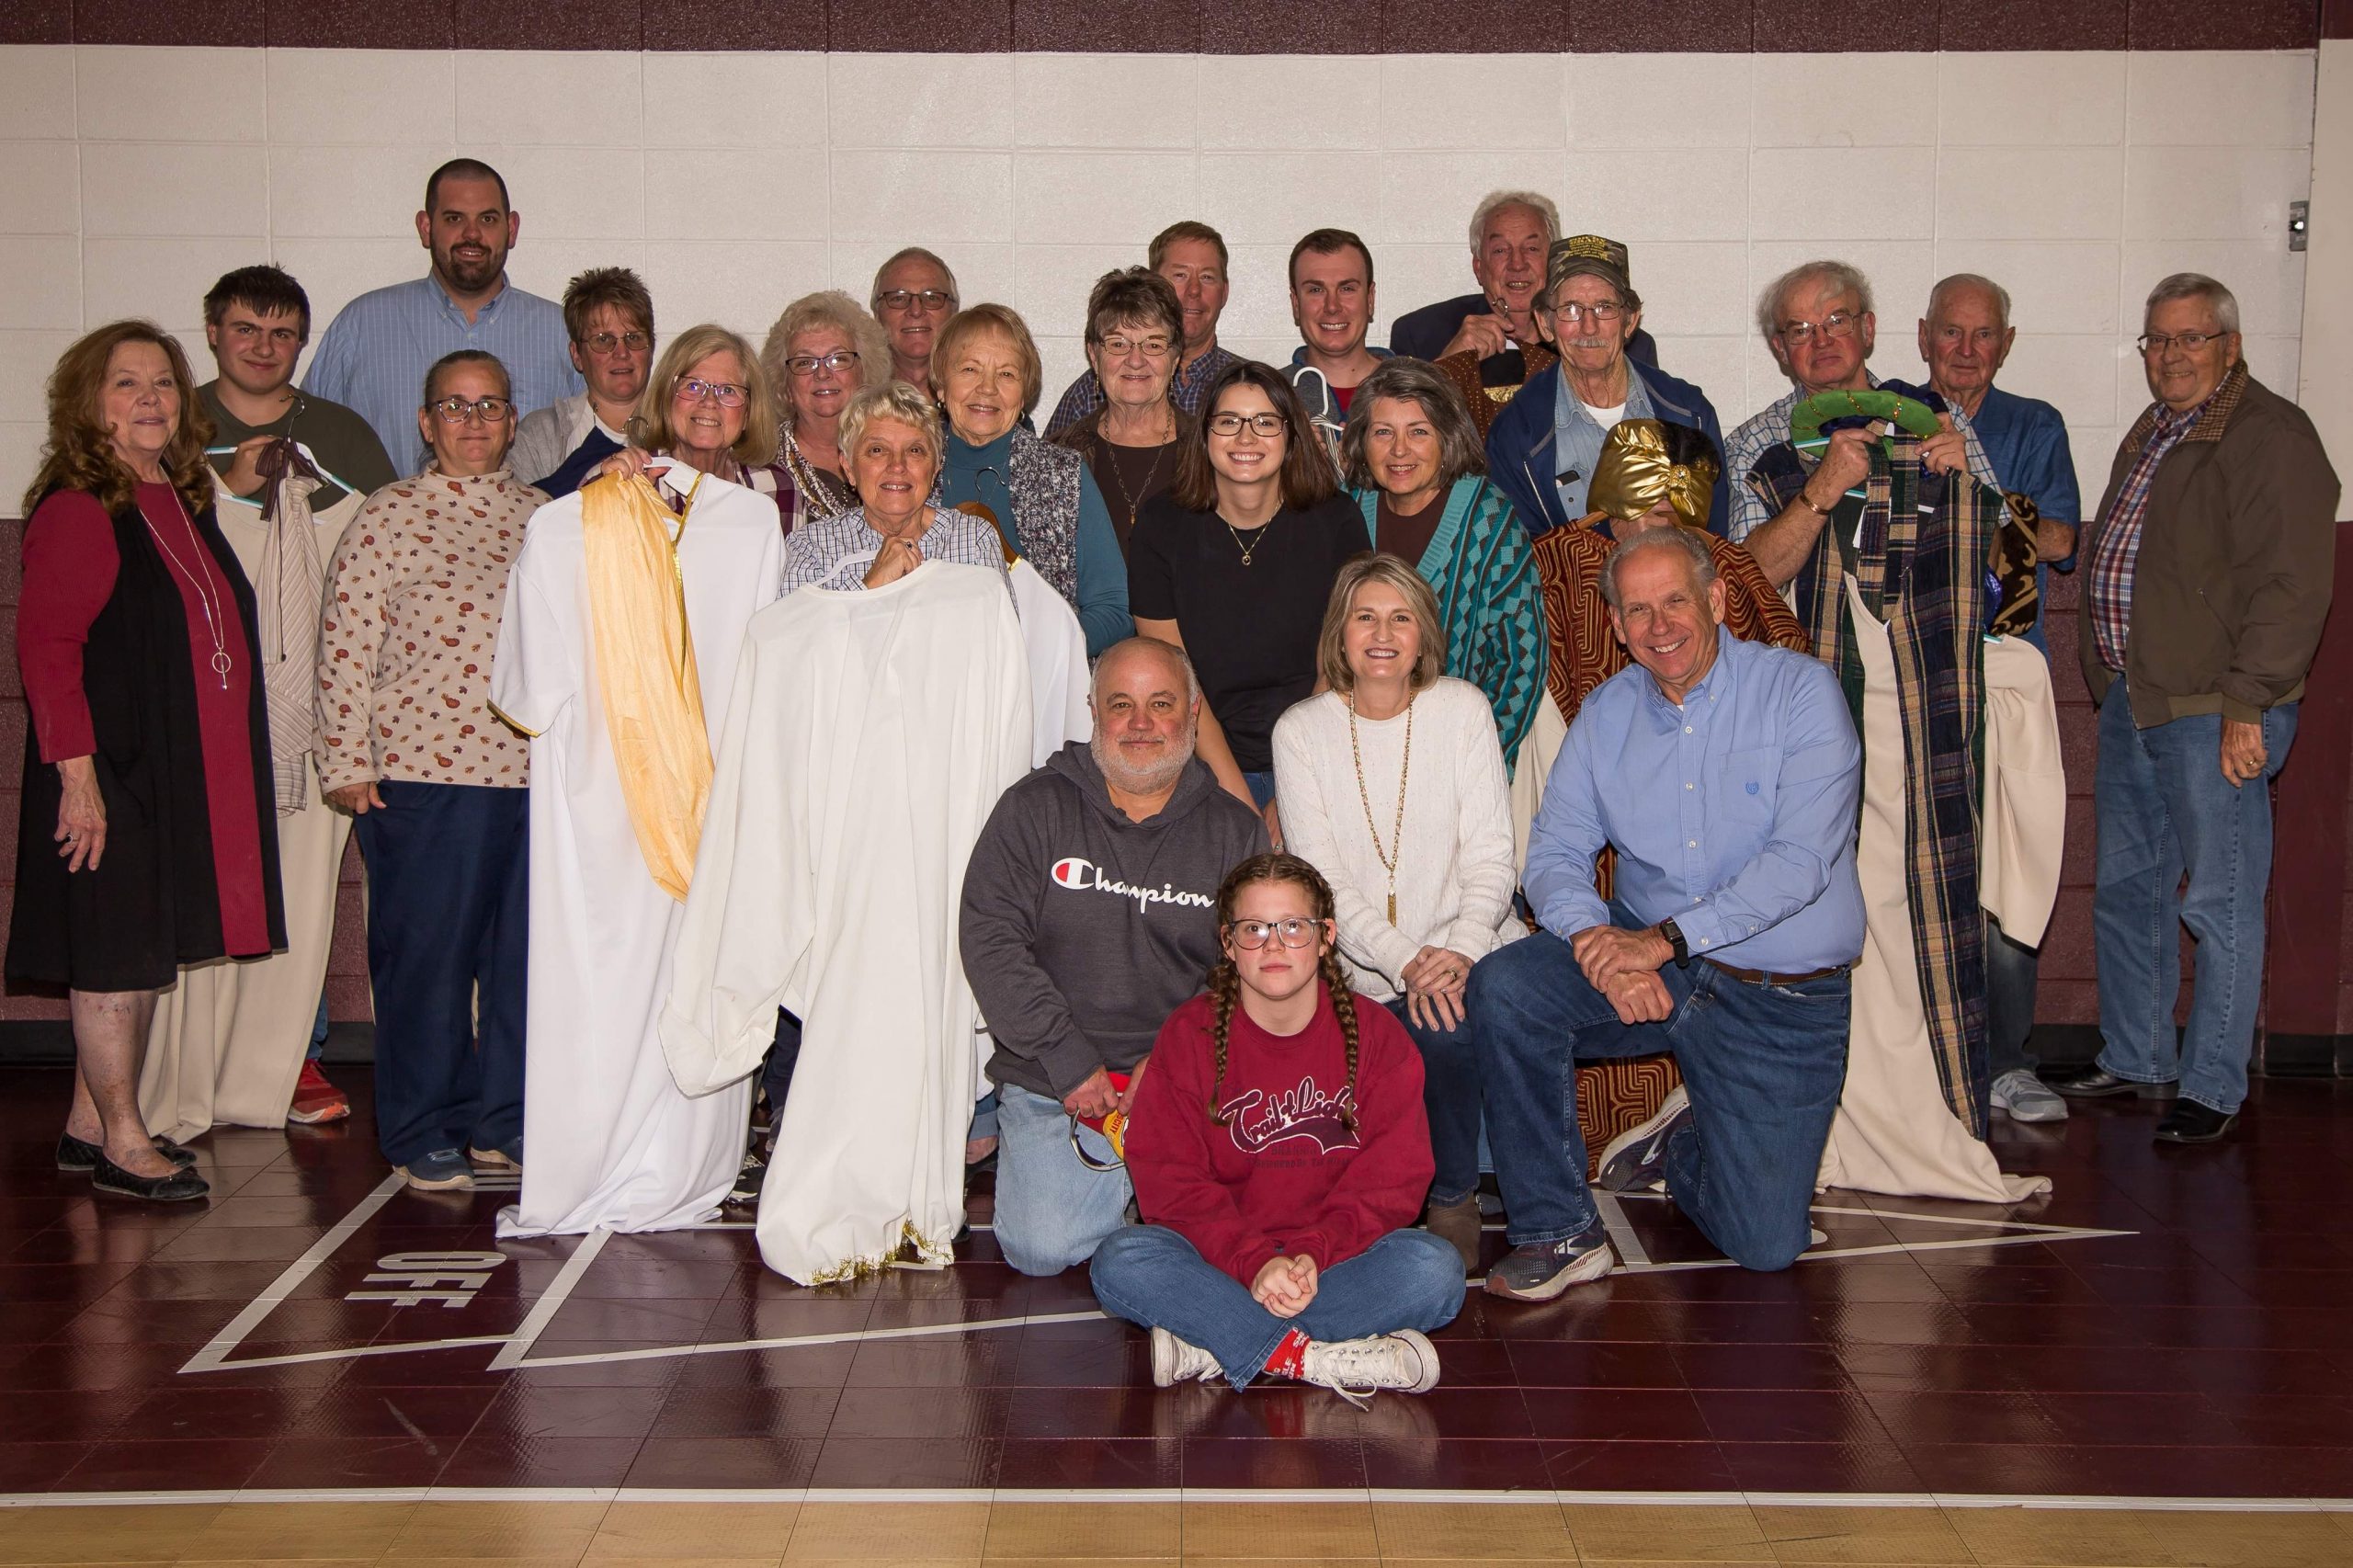 Cast and Crew of the Live Nativity Scene